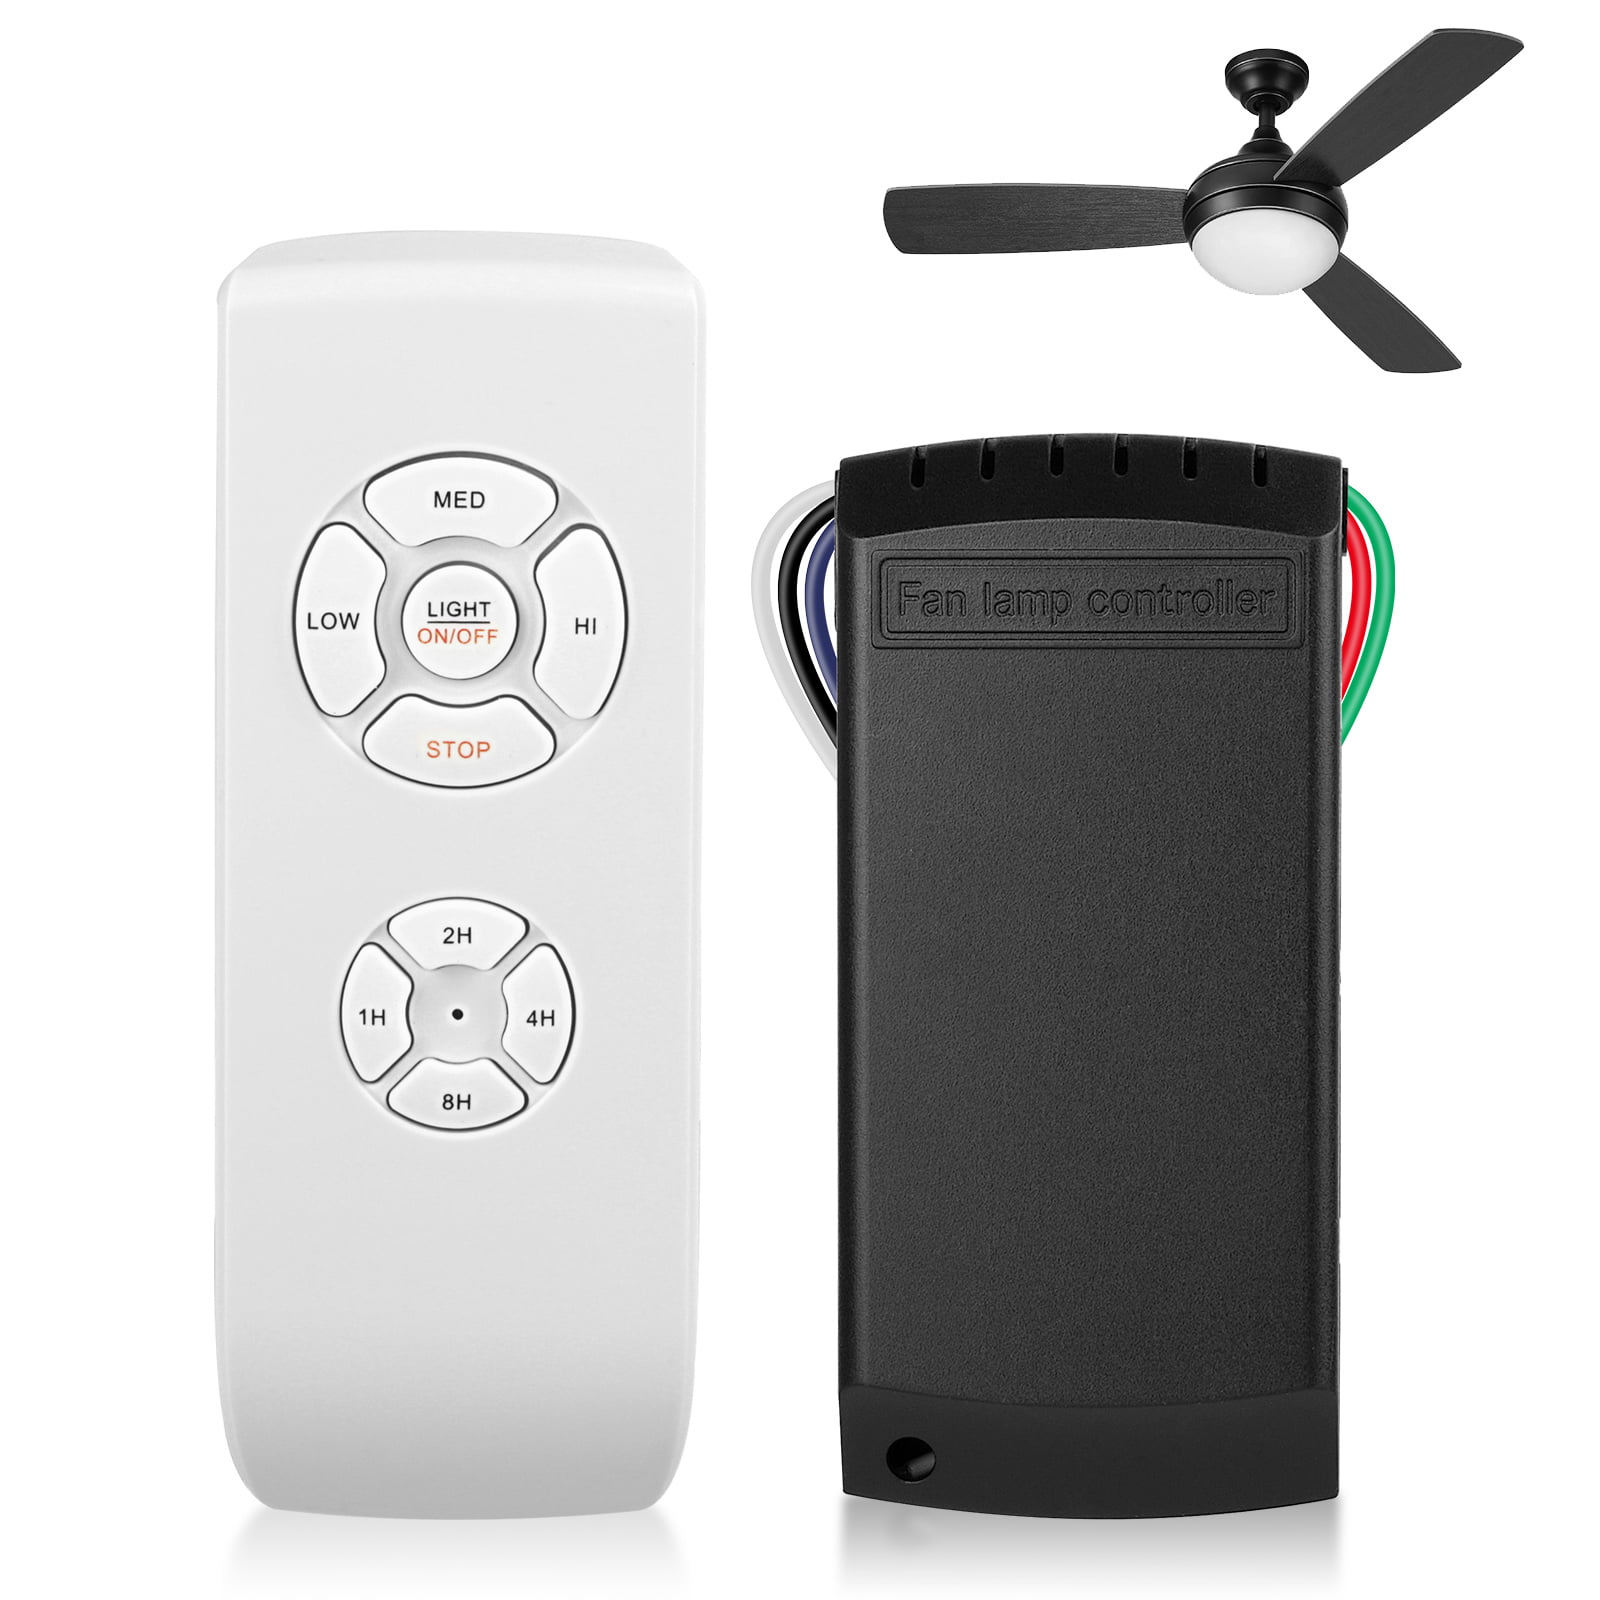 Universal Ceiling Fan Remote Control, Is There A Universal Ceiling Fan Remote